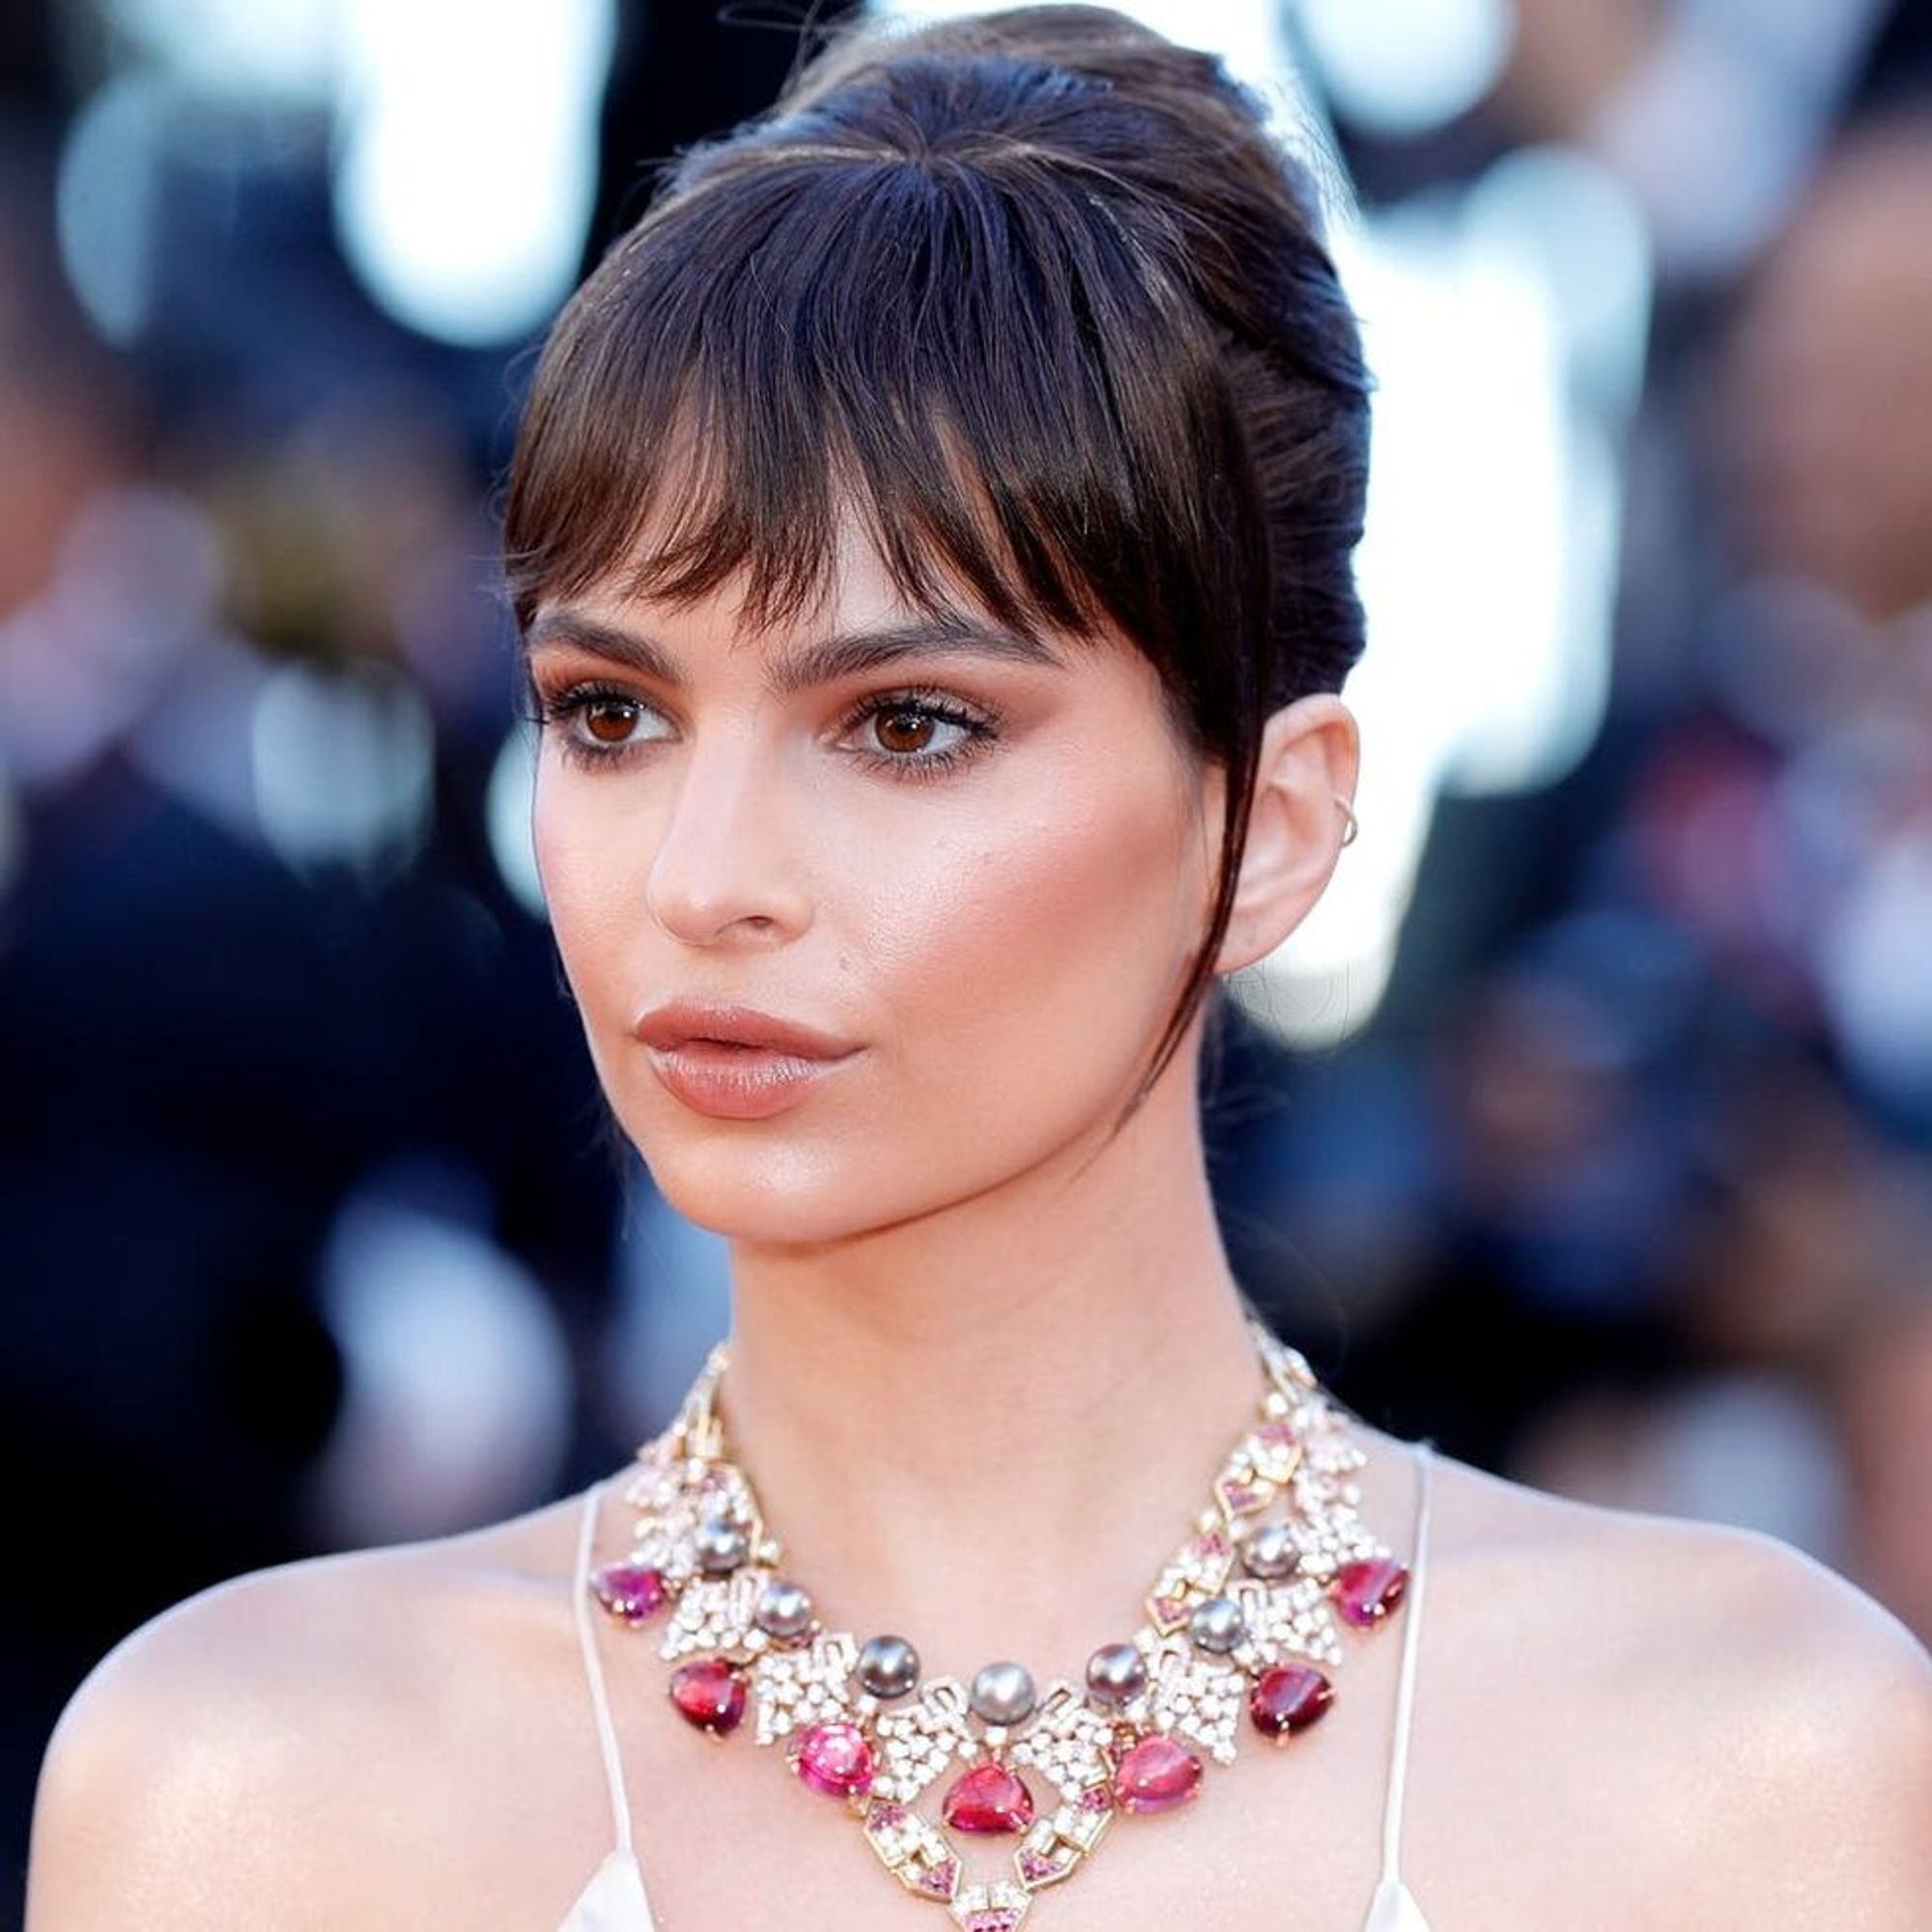 92  How To Get Curtain Bangs Without Cutting Your Hair for Girls